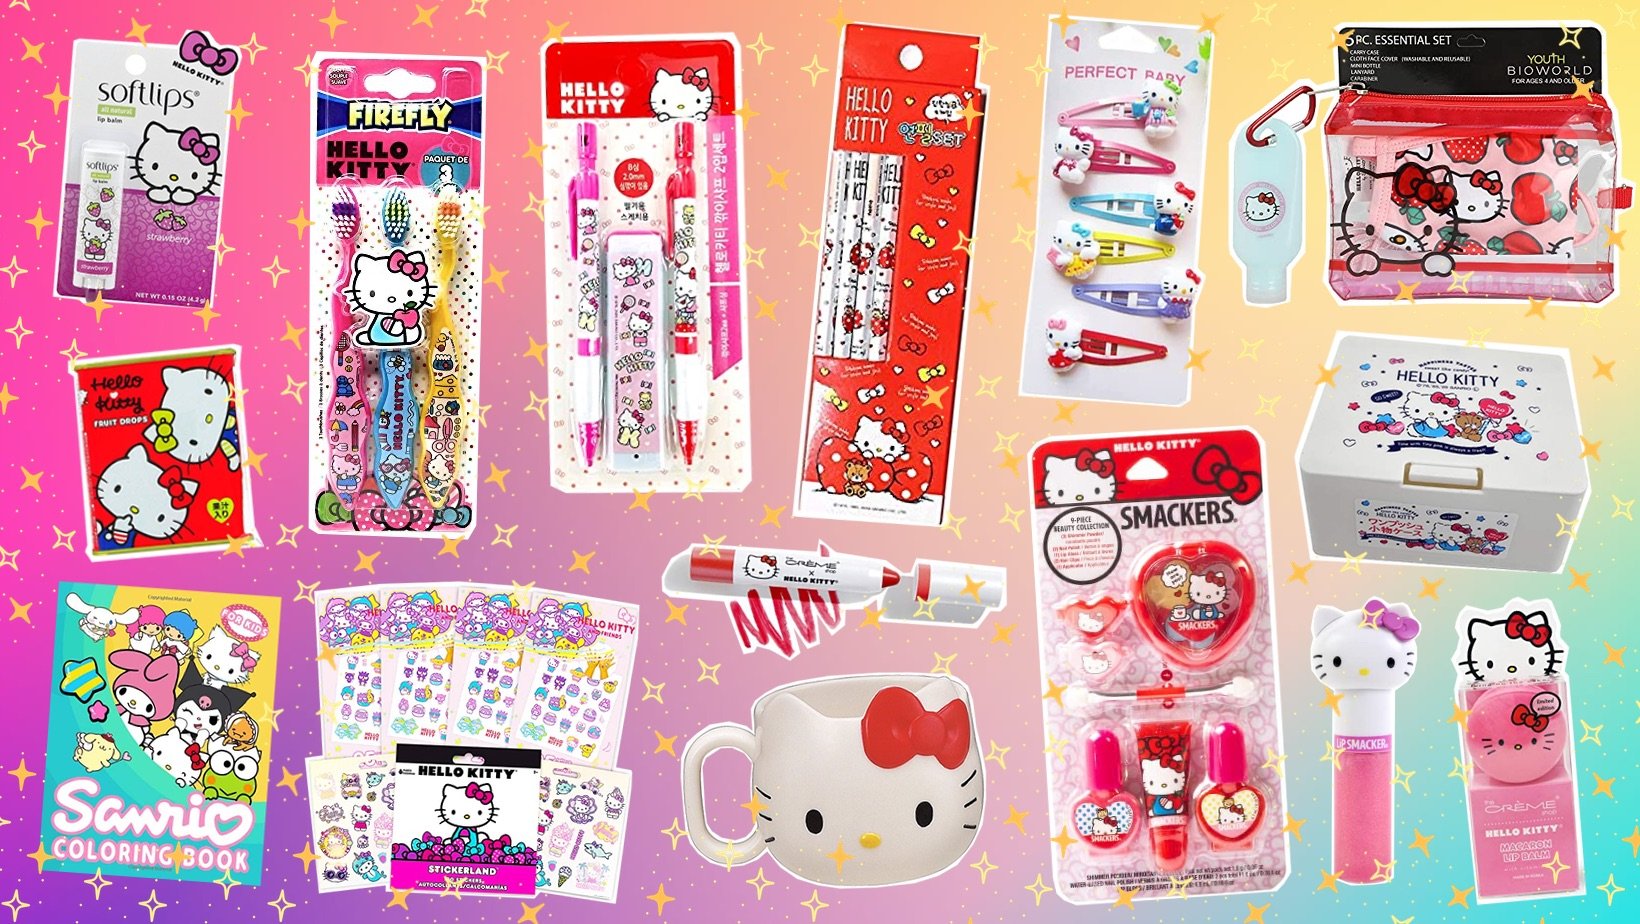 Sanrio Lovely Sweets Hello Kitty Pop 'n Candy Squishy Pink Berry 